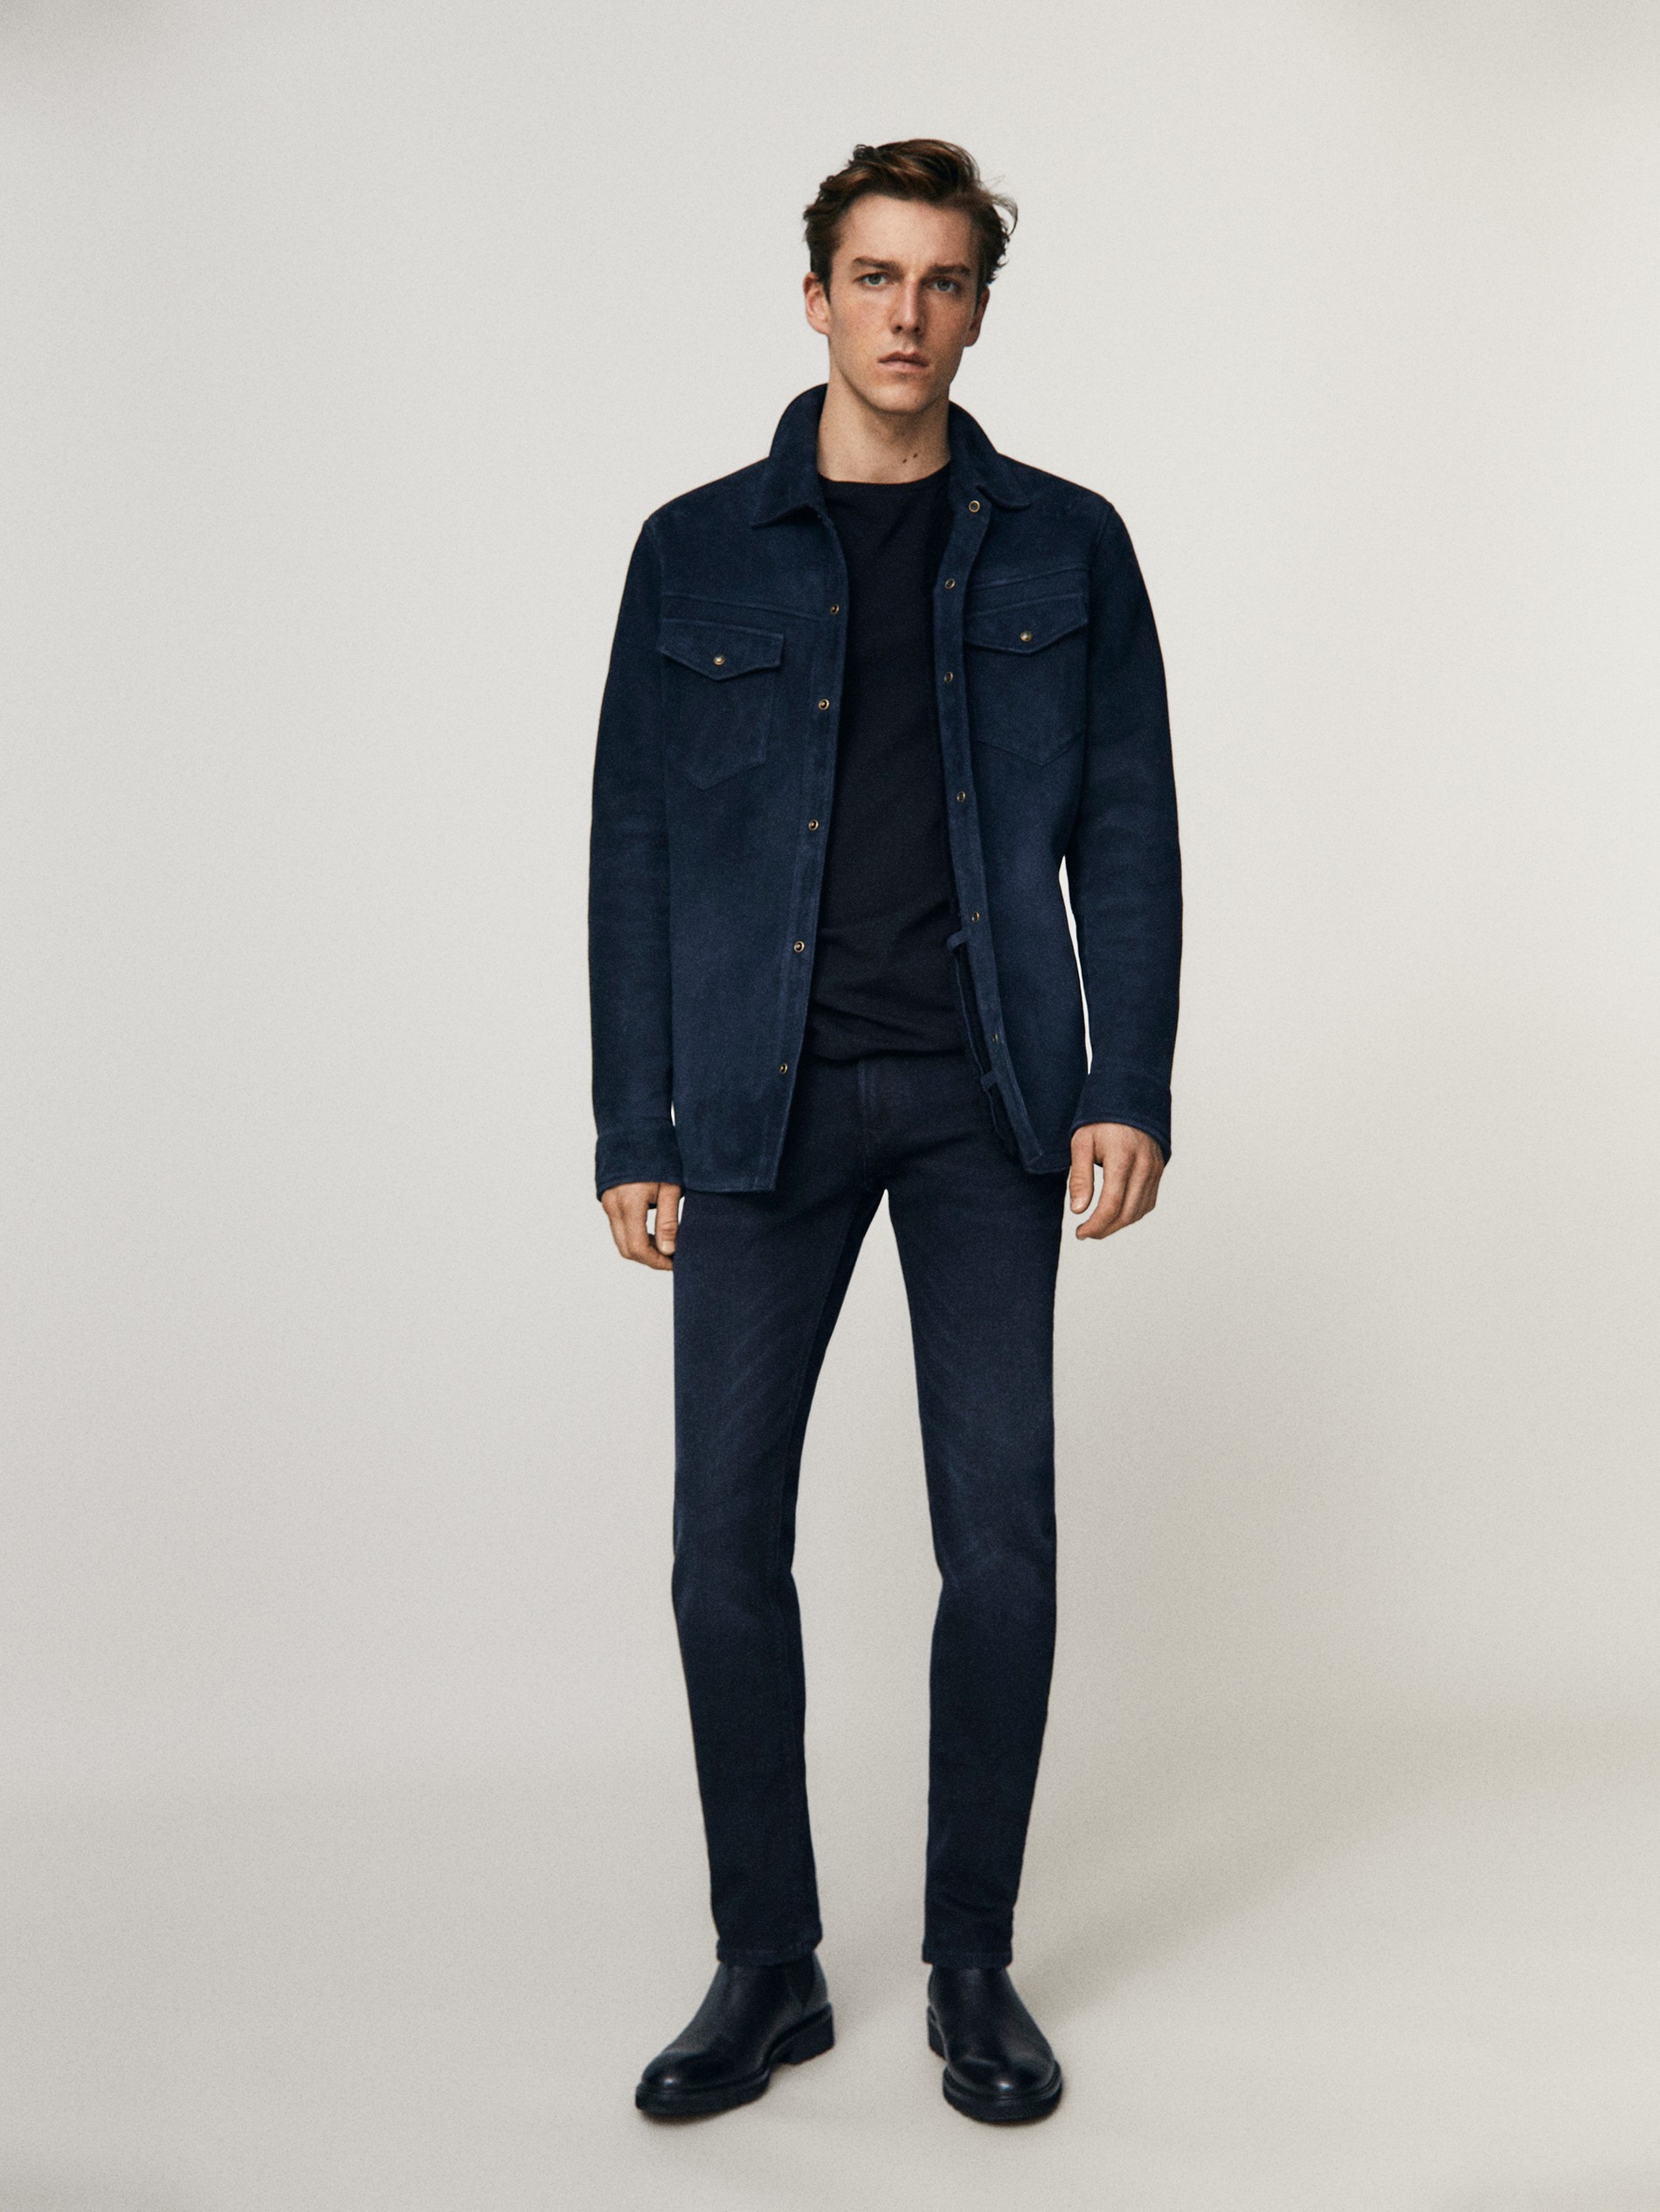 massimo dutti jeans skinny fit